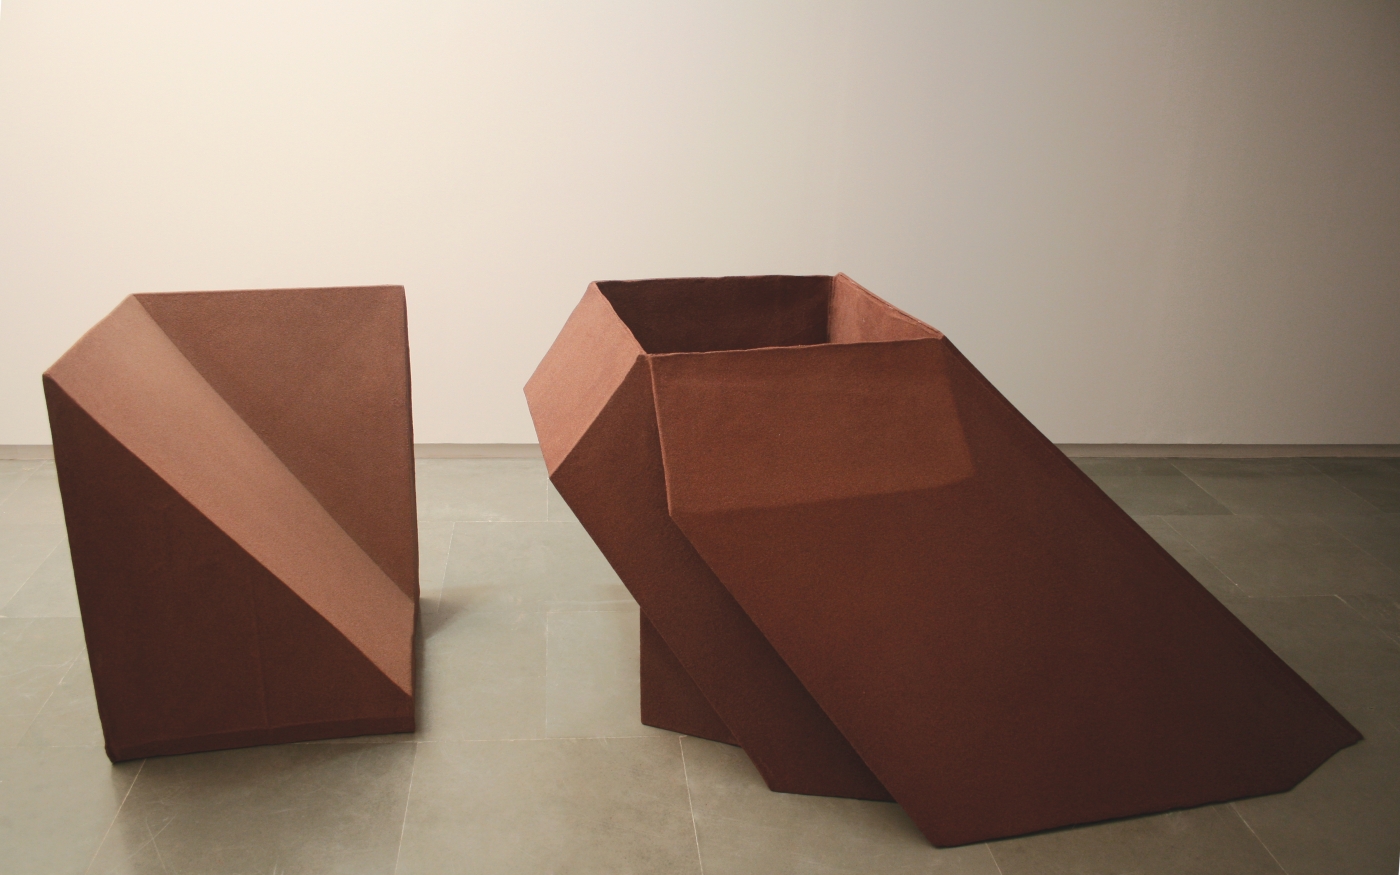 Container as content, 2006